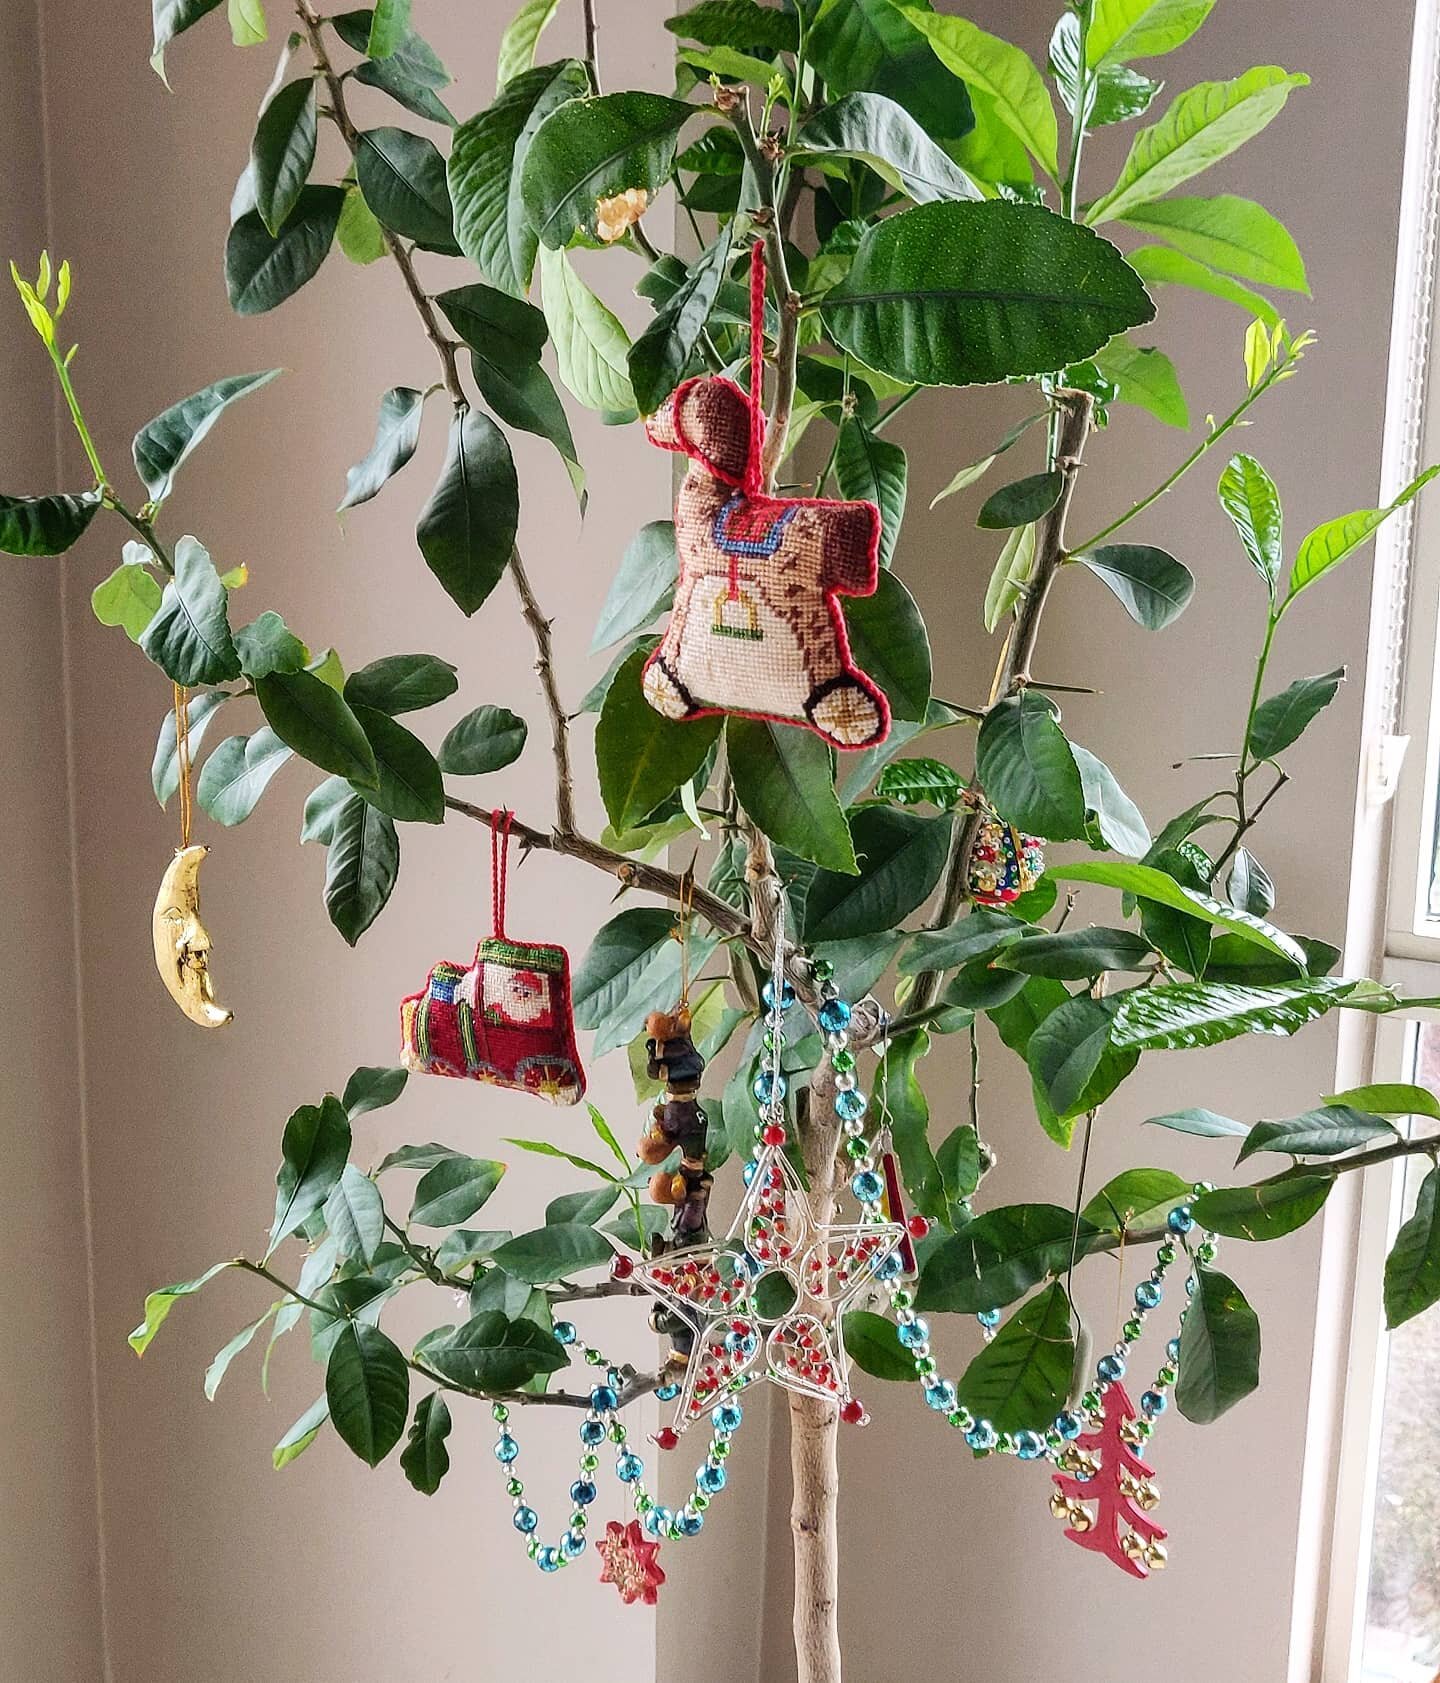 Behold Lulu: the festive, solstice, cruelty-free lemon tree 🍋

There are 10 ornaments on Lulu as part of her holiday drag decor: if you can find and name them all... then you clearly needed to take that break from your day for a merry puzzle 🤓 

Fo